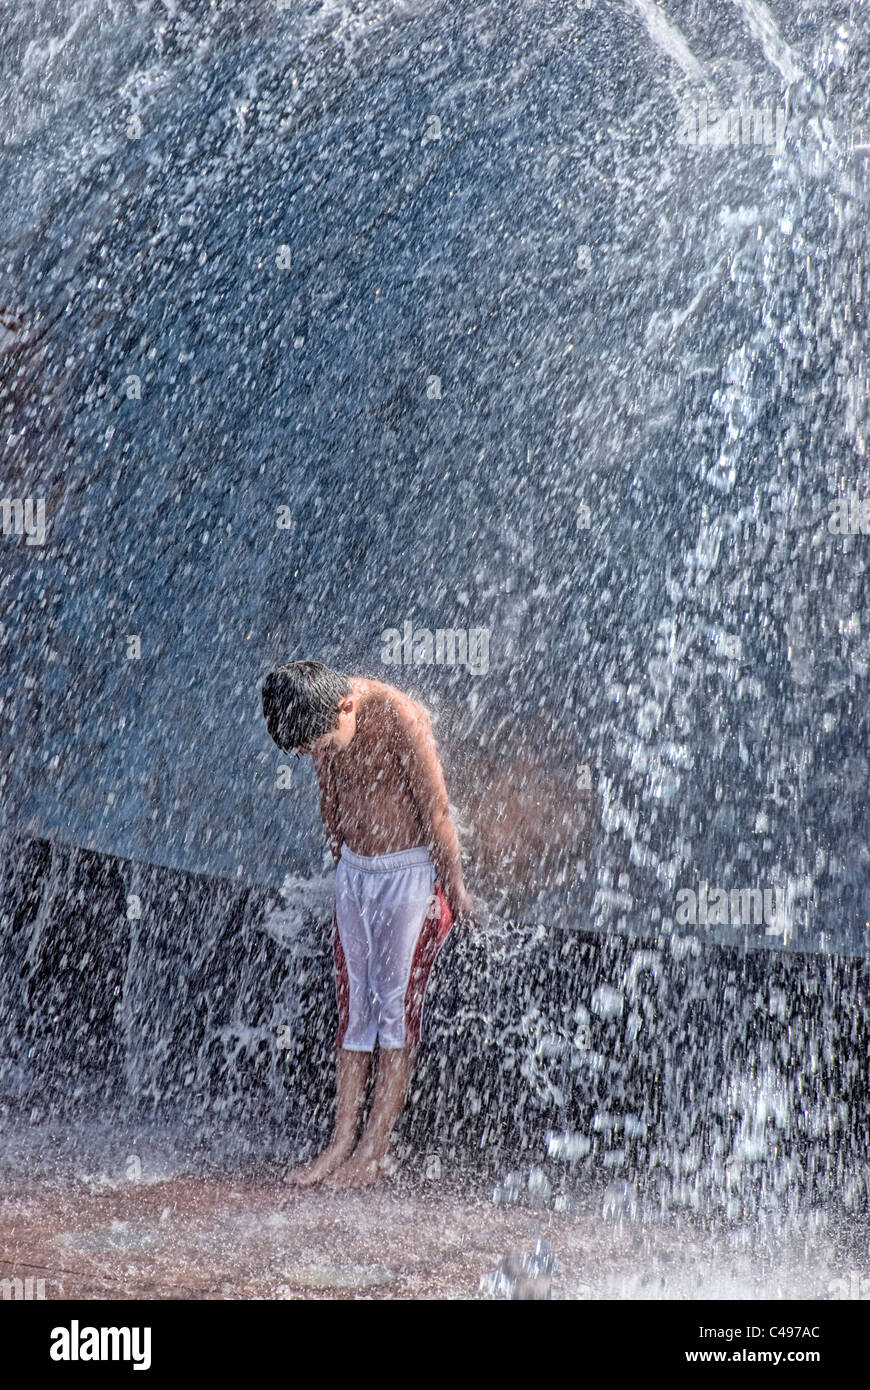 Young boy playing in steel water fountain, Seattle Center, Seattle, Washington, USA Stock Photo